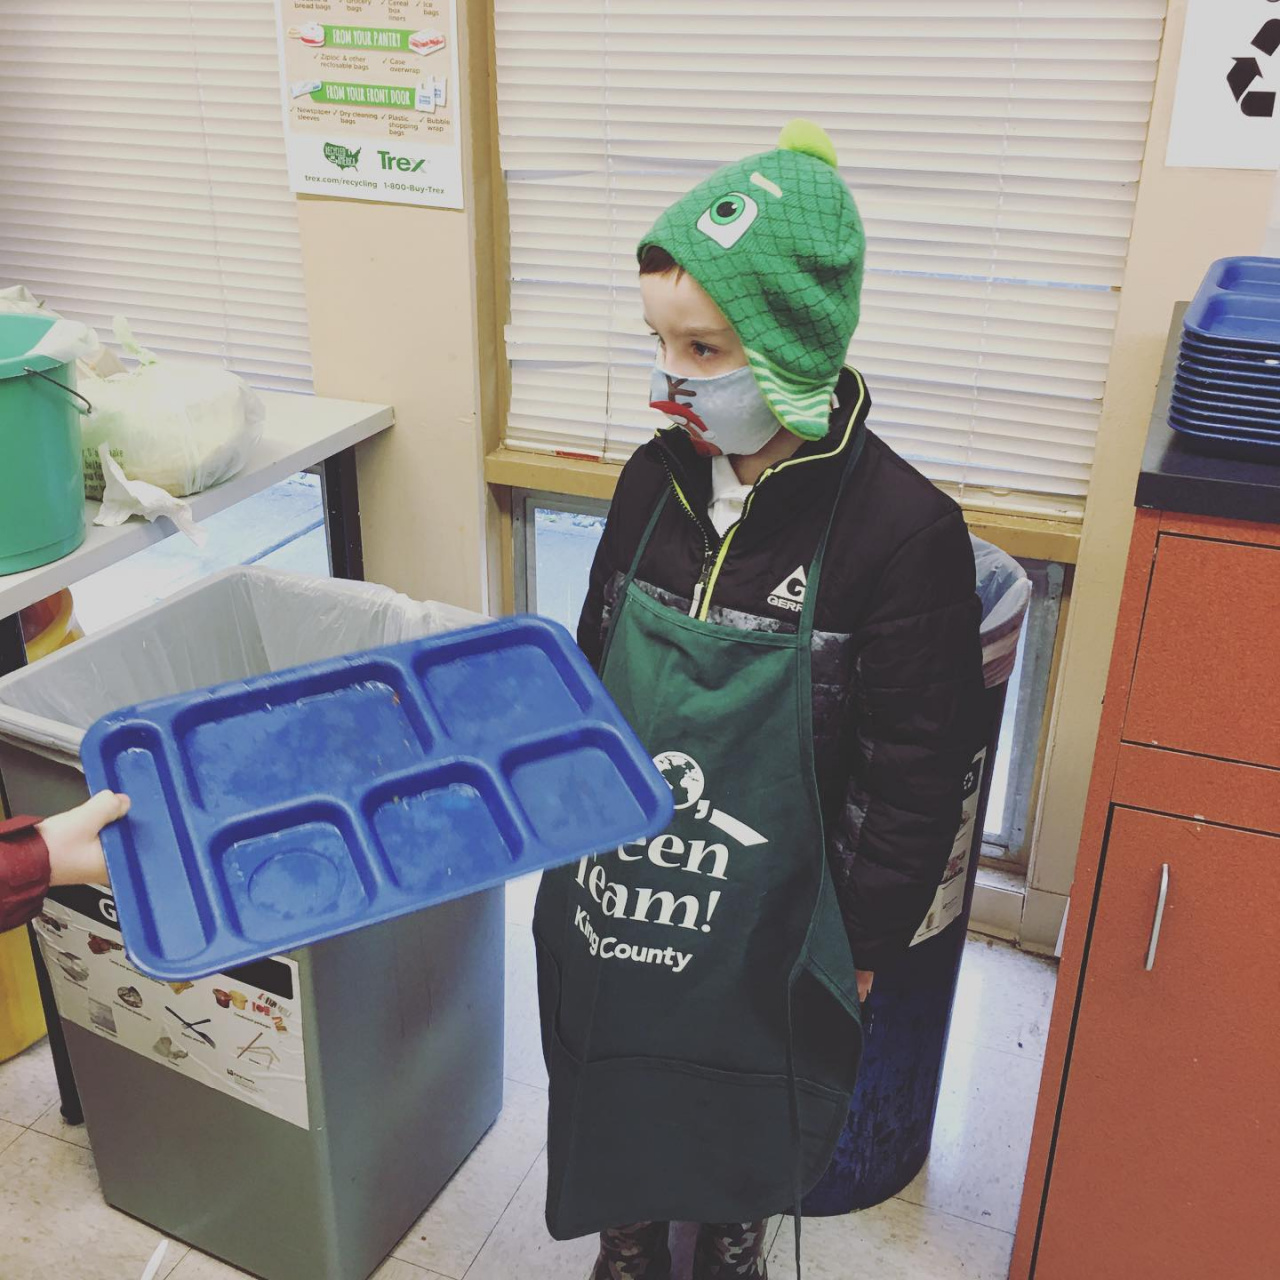 Learning About Recycling for the, "Green Team!"